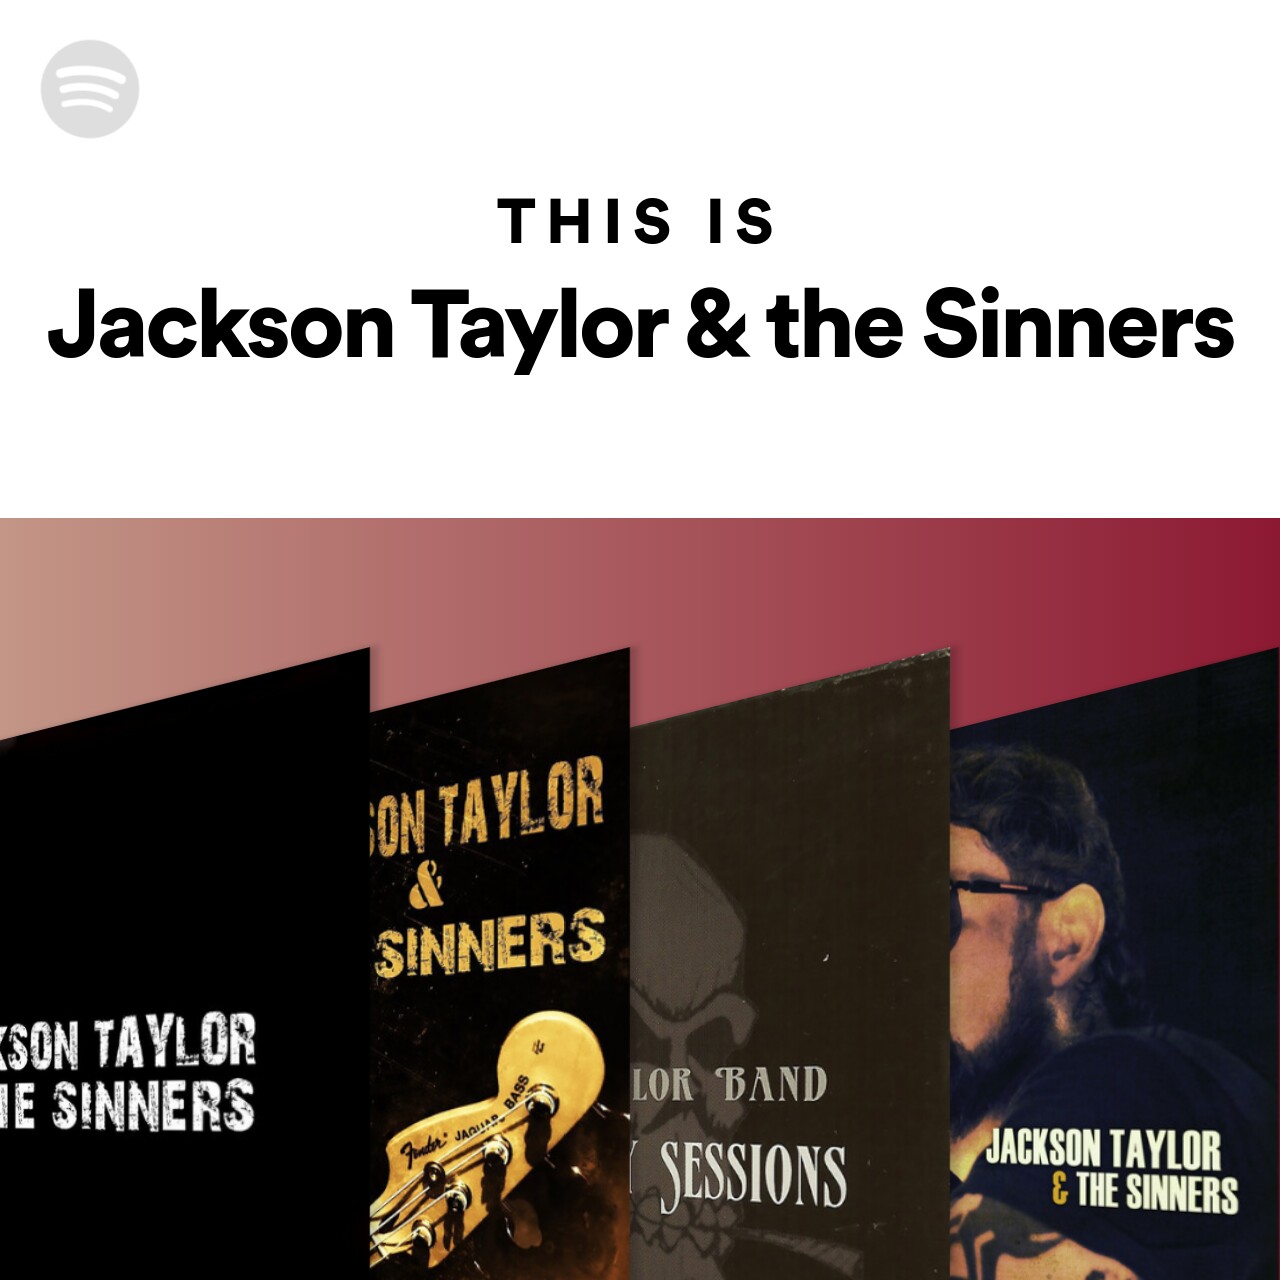 This Is Jackson Taylor & the Sinners